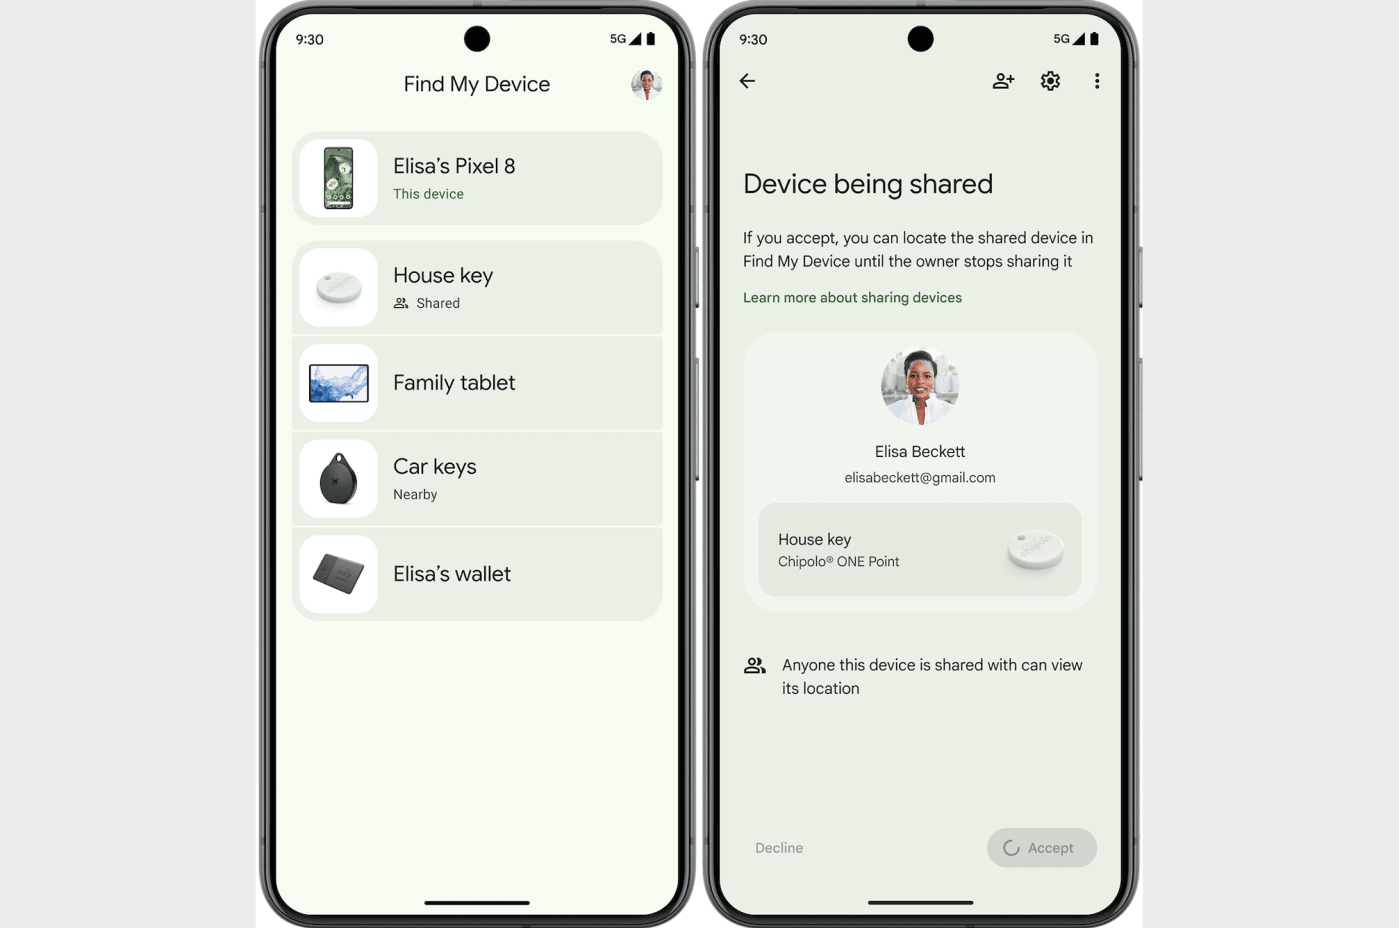 Google's long-awaited Find My Device network launches today